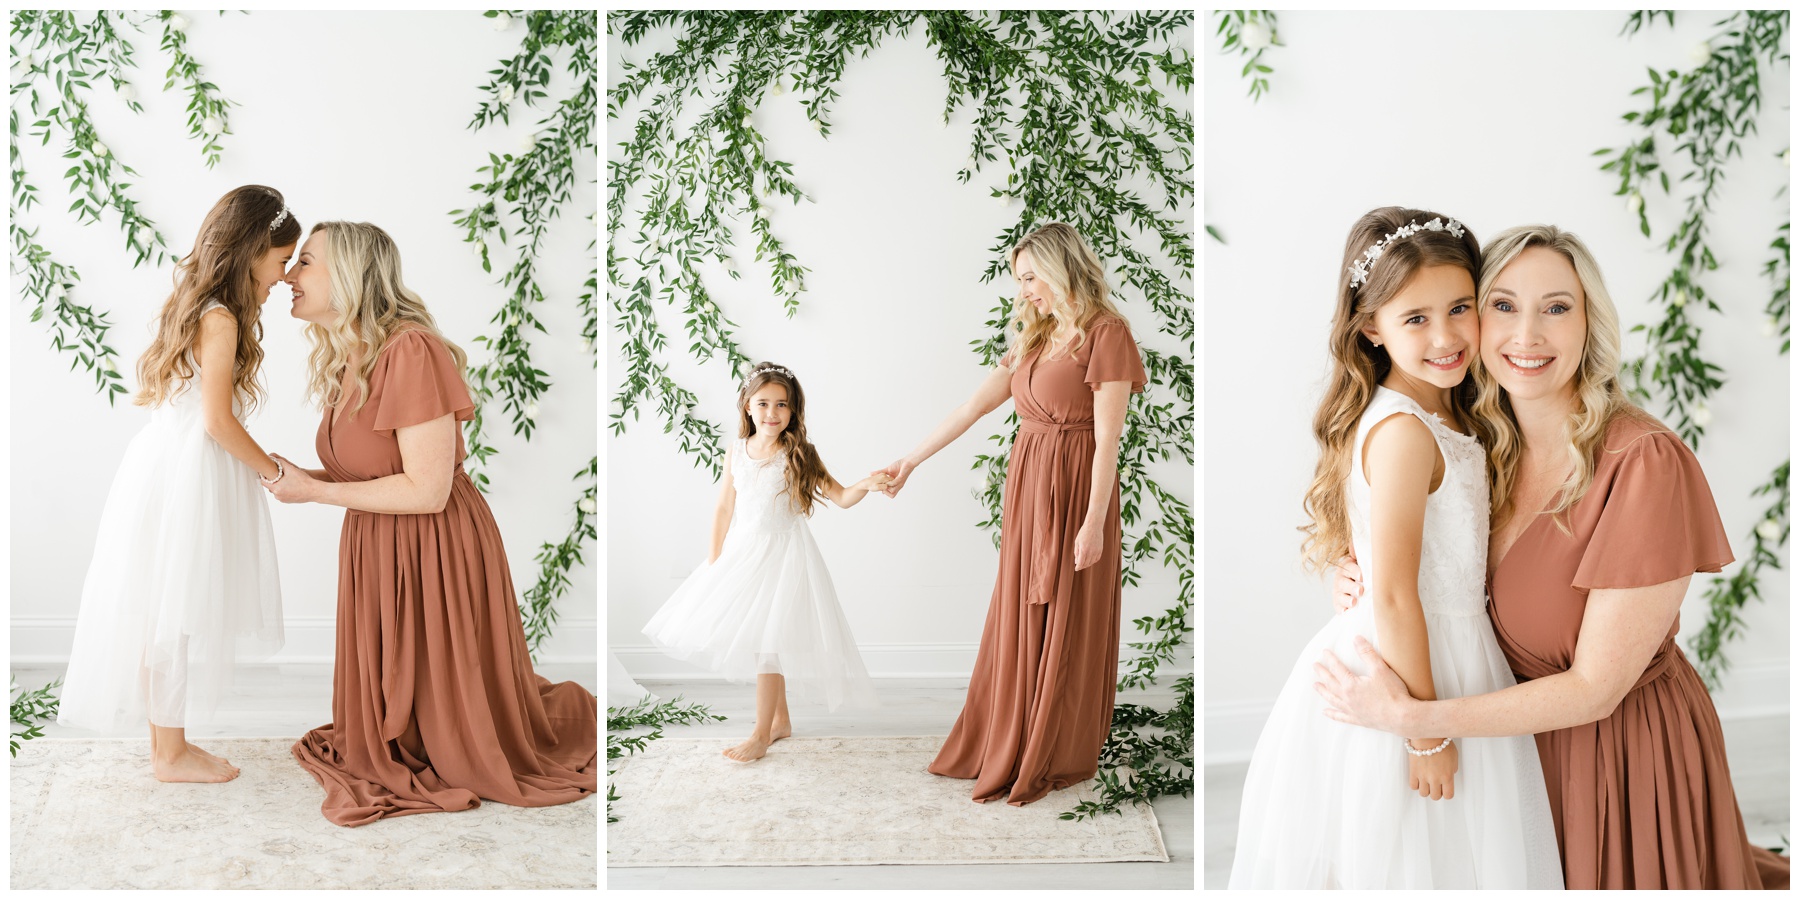 Photos of a mother and daughter by Atlanta Motherhood photographer Lindsey Powell.